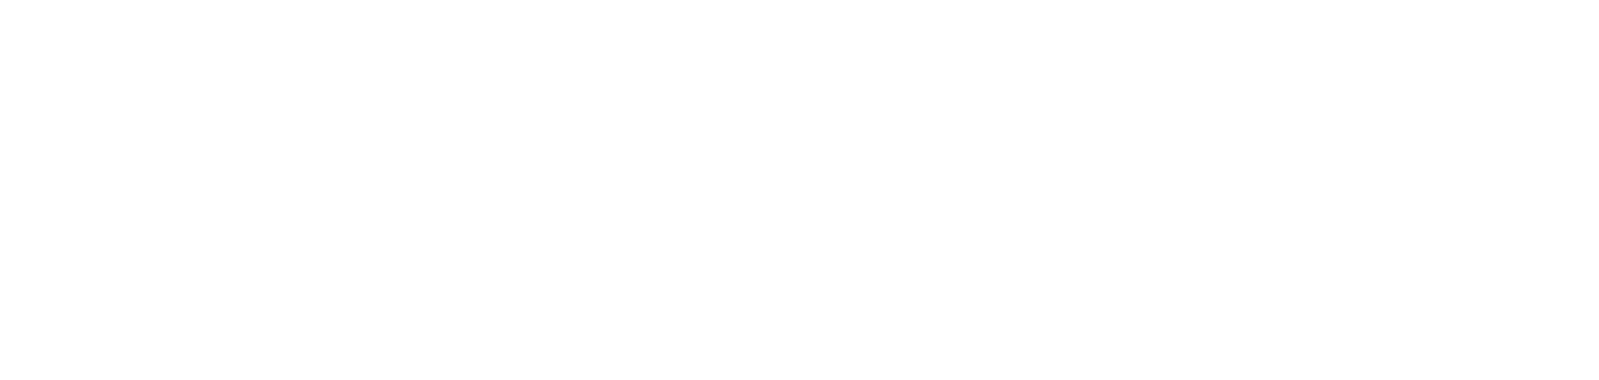 Mindray logo large for dark backgrounds (transparent PNG)